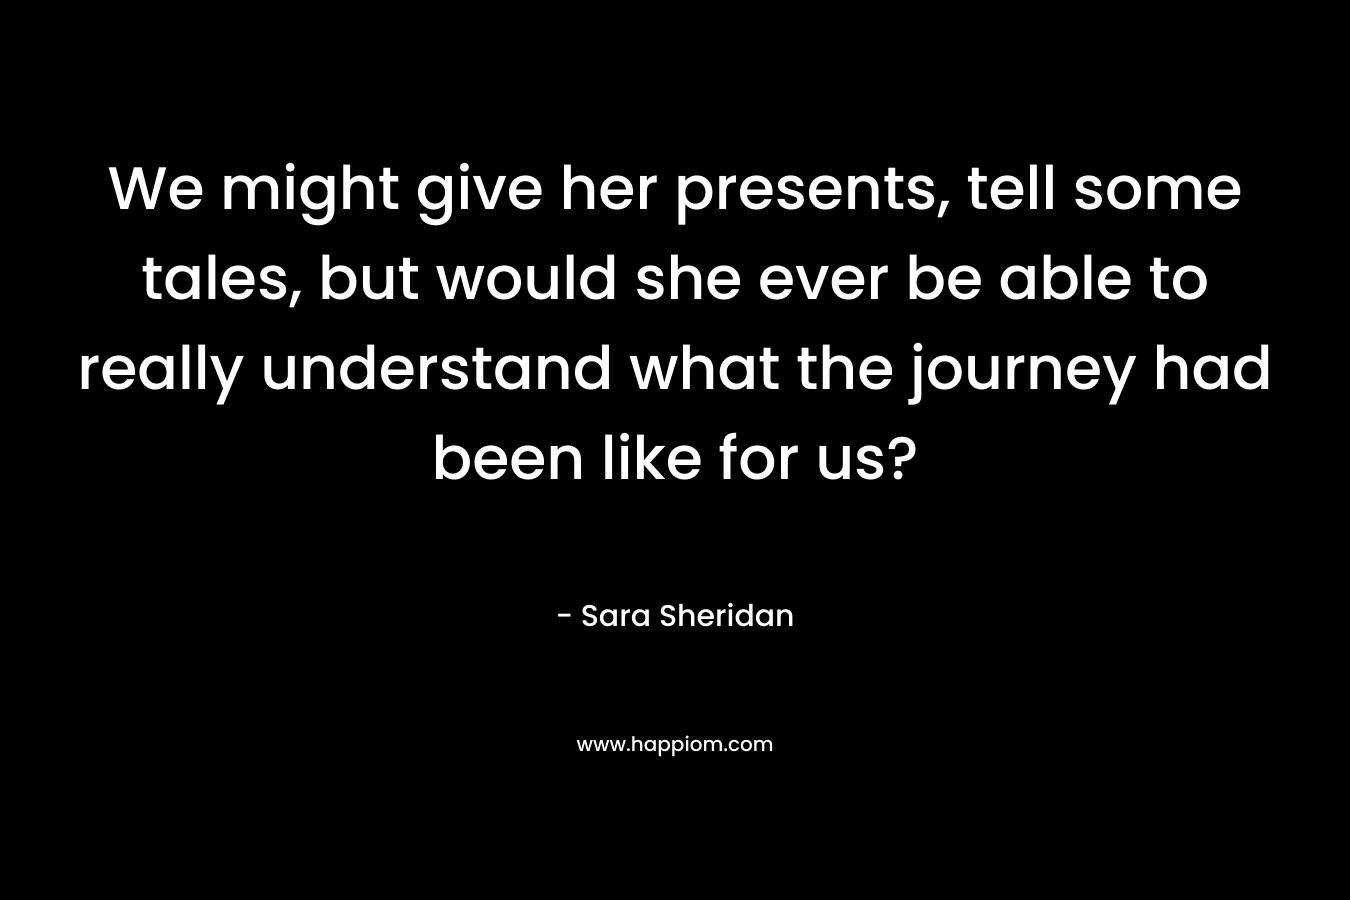 We might give her presents, tell some tales, but would she ever be able to really understand what the journey had been like for us?